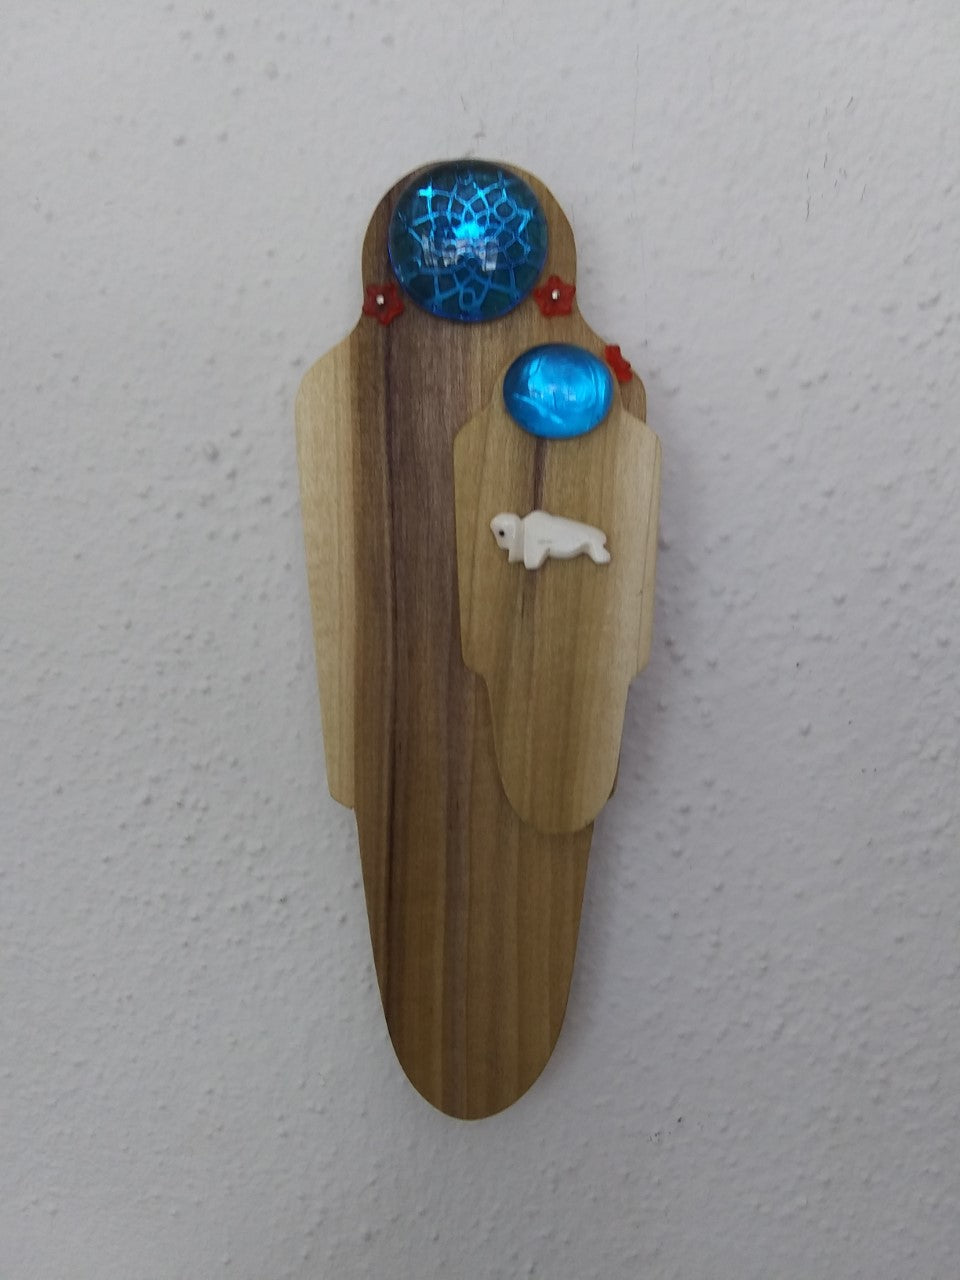 Wooden Spirit Shape of a Woman holding a Child  Mixed media  Wooden shape with glass stone and bone Buffalo  Made in the image of a mother and child  7 1/2" long x 3" wide x 1/2" deep  Wire attached on back for hanging